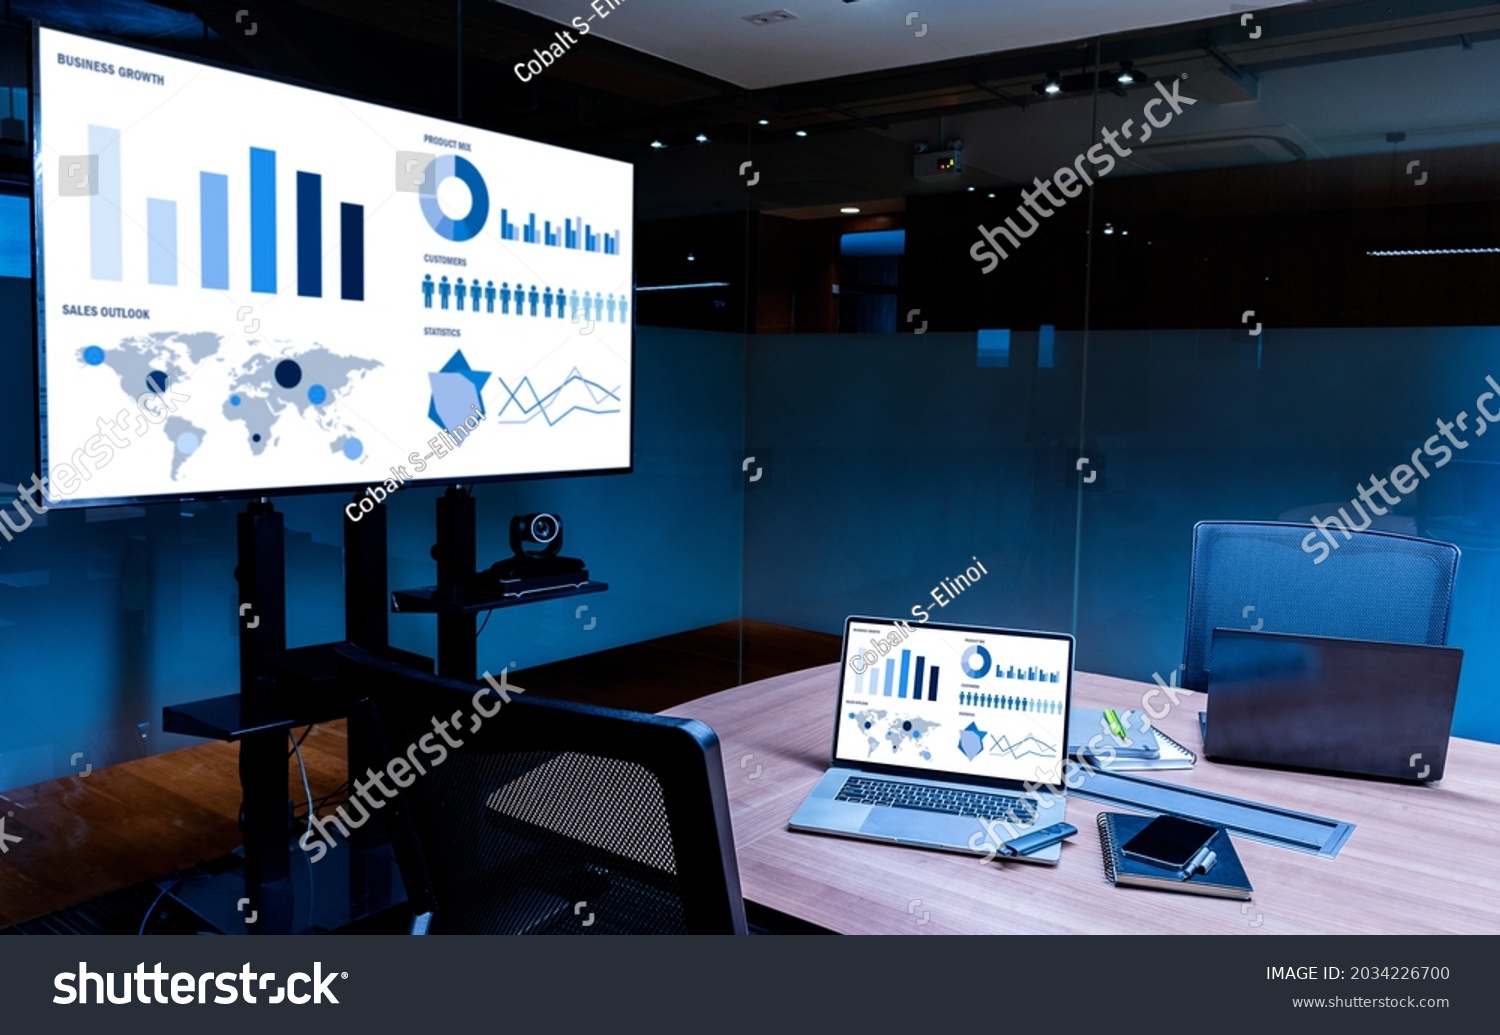 Mock up sales summary slide show presentation on display television and laptop with notebook on table in meeting room #2034226700